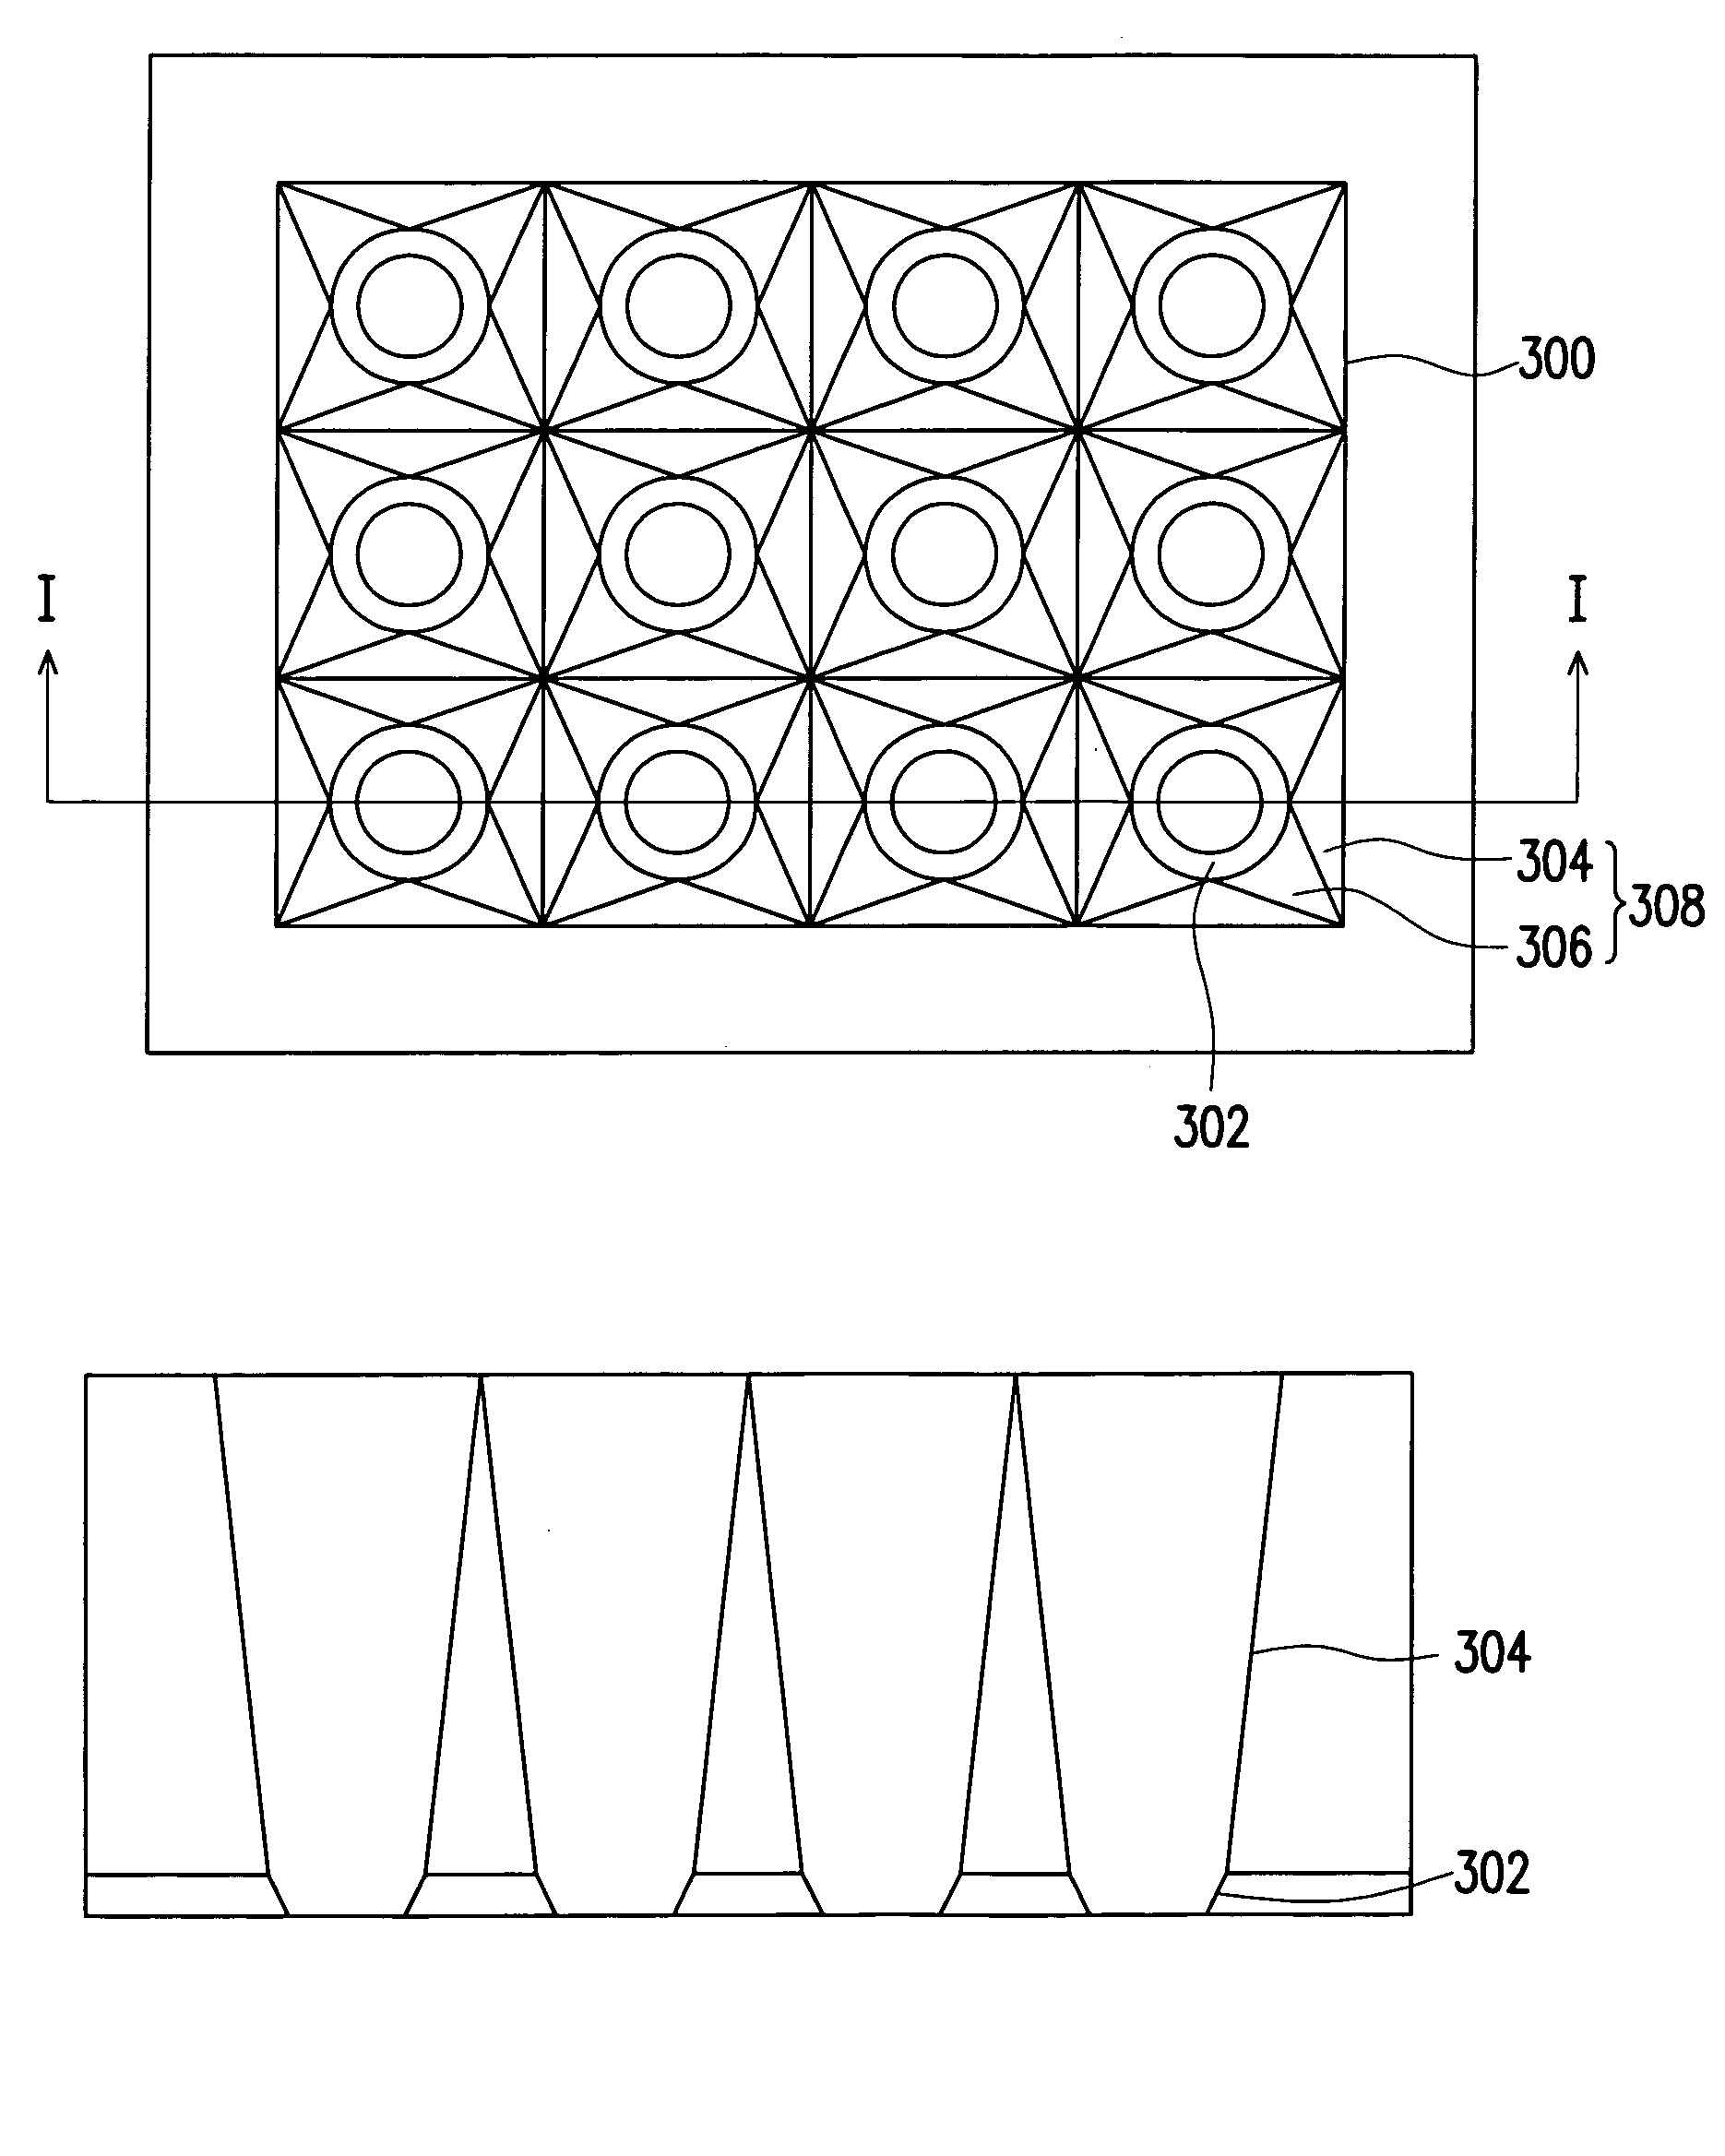 Structure of illuminating unit and structure of illuminating light source